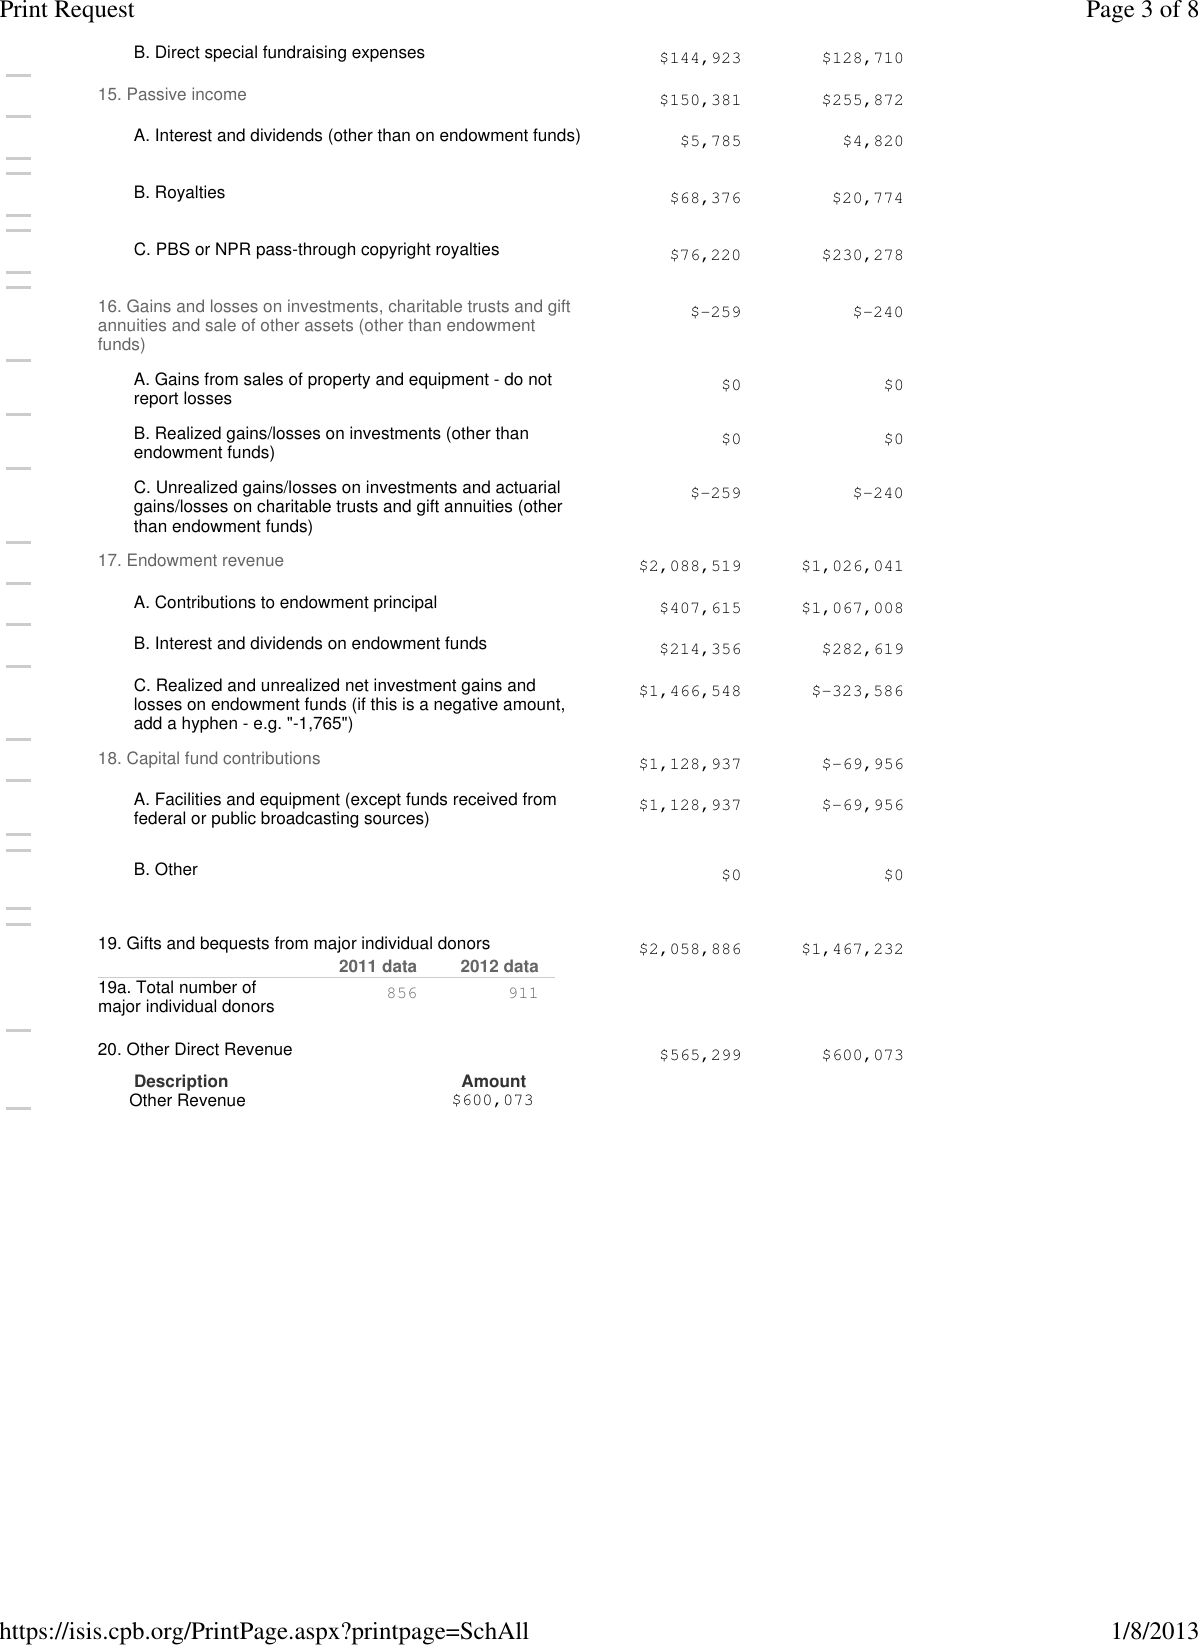 Page 3 of 10 - S  CPB-Annual-Financial-Report-TV-2012